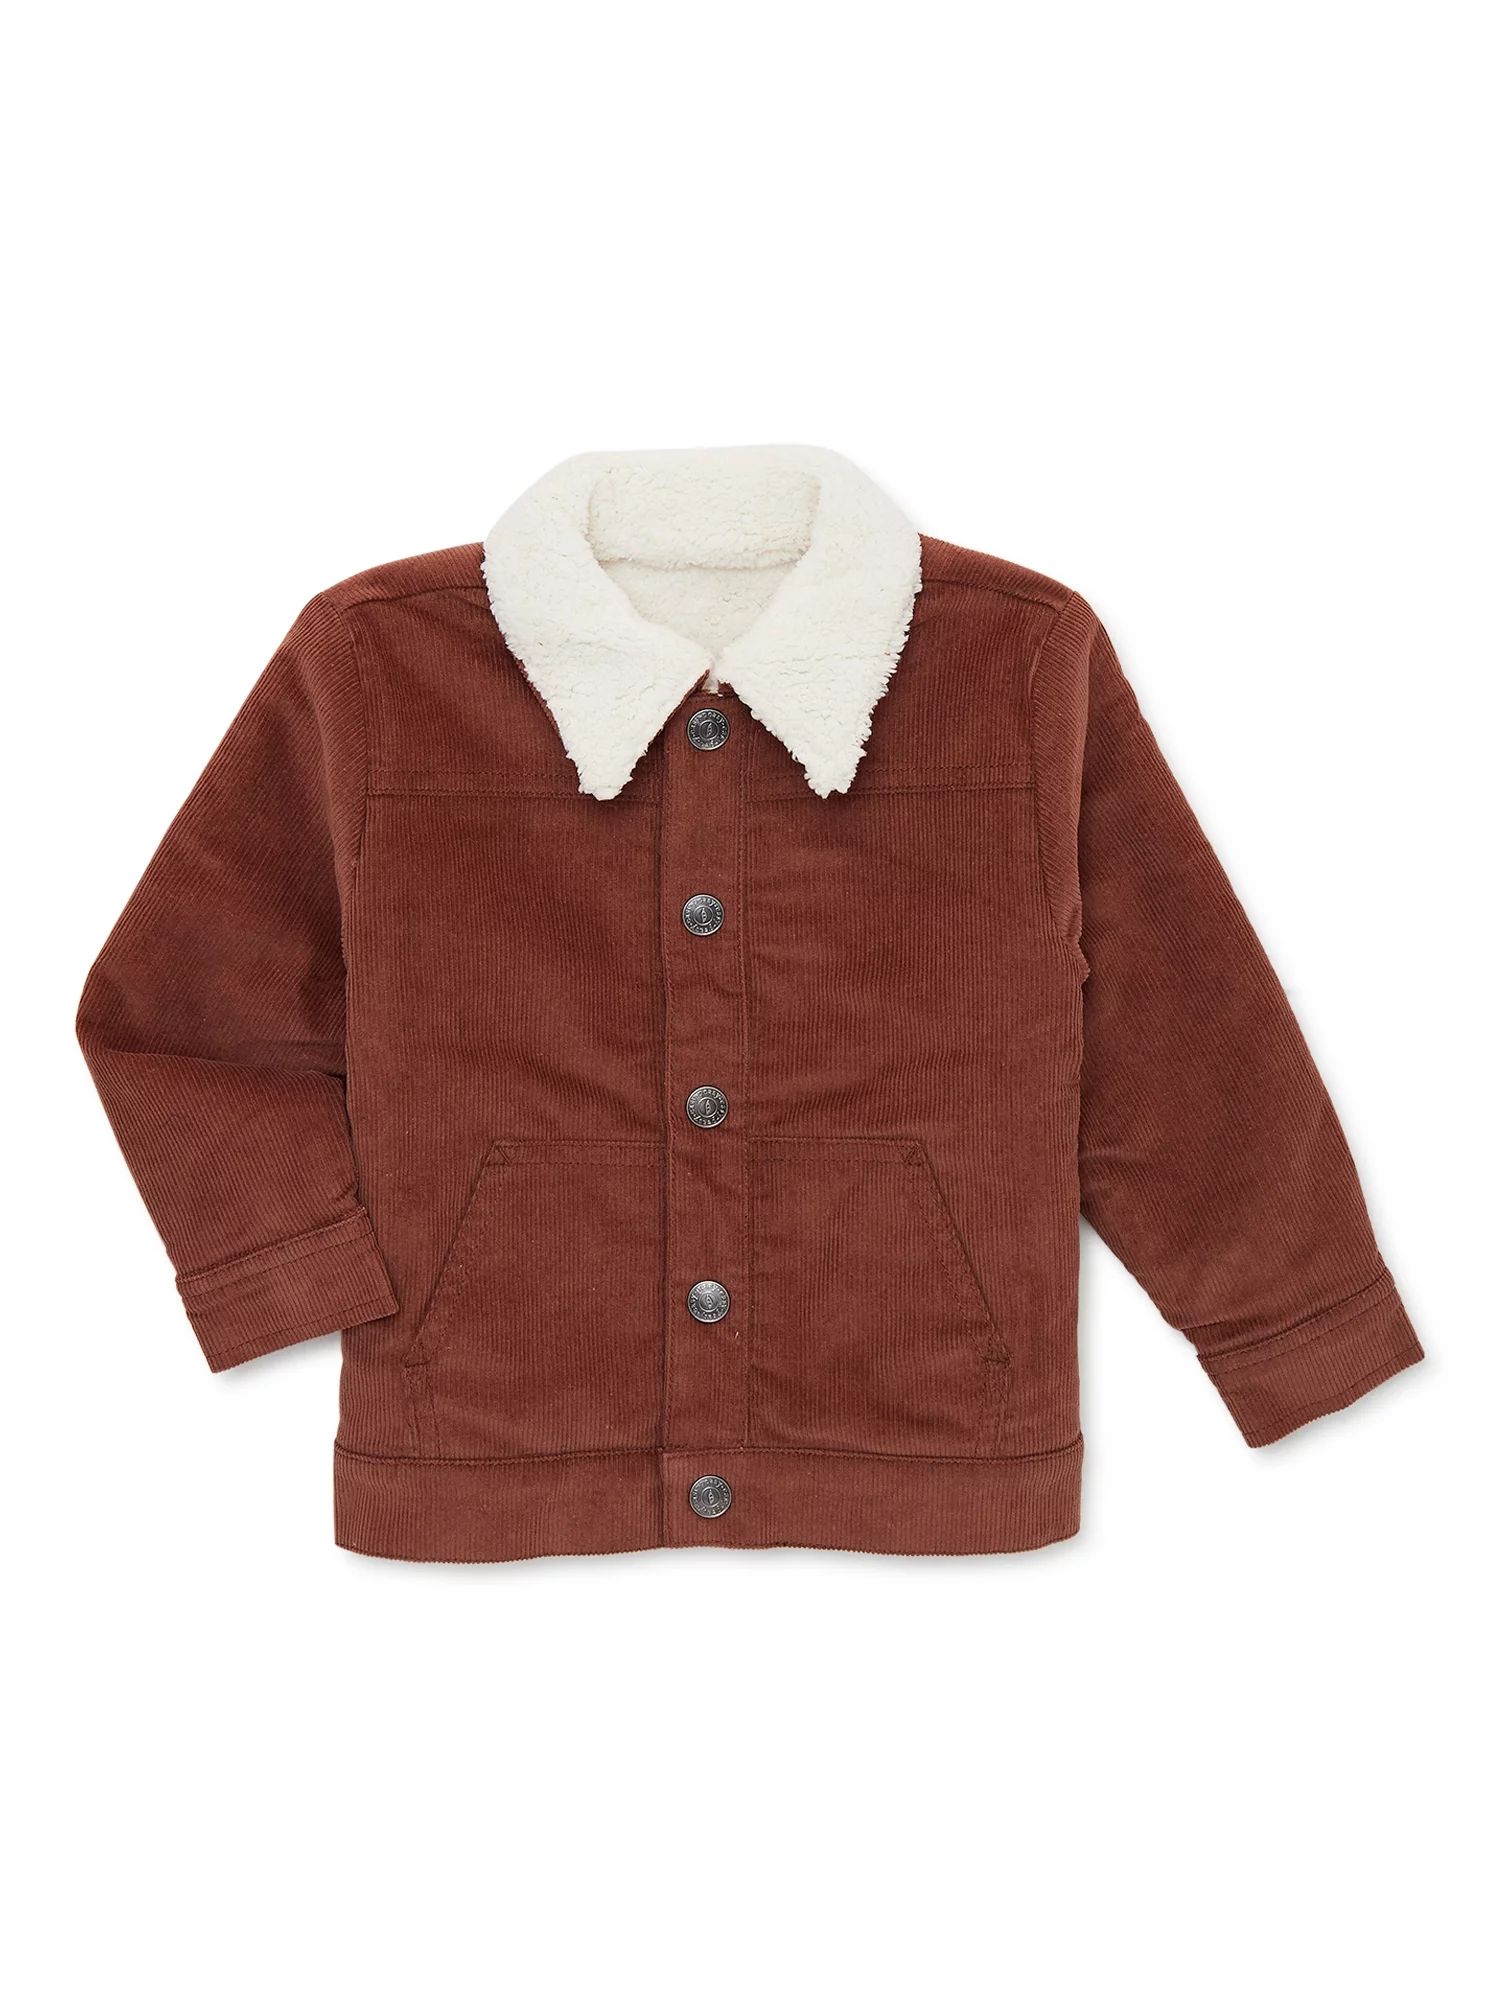 easy-peasy Baby and Toddler Boy Faux Sherpa Jacket, Sizes 12 Months-5T | Walmart (US)